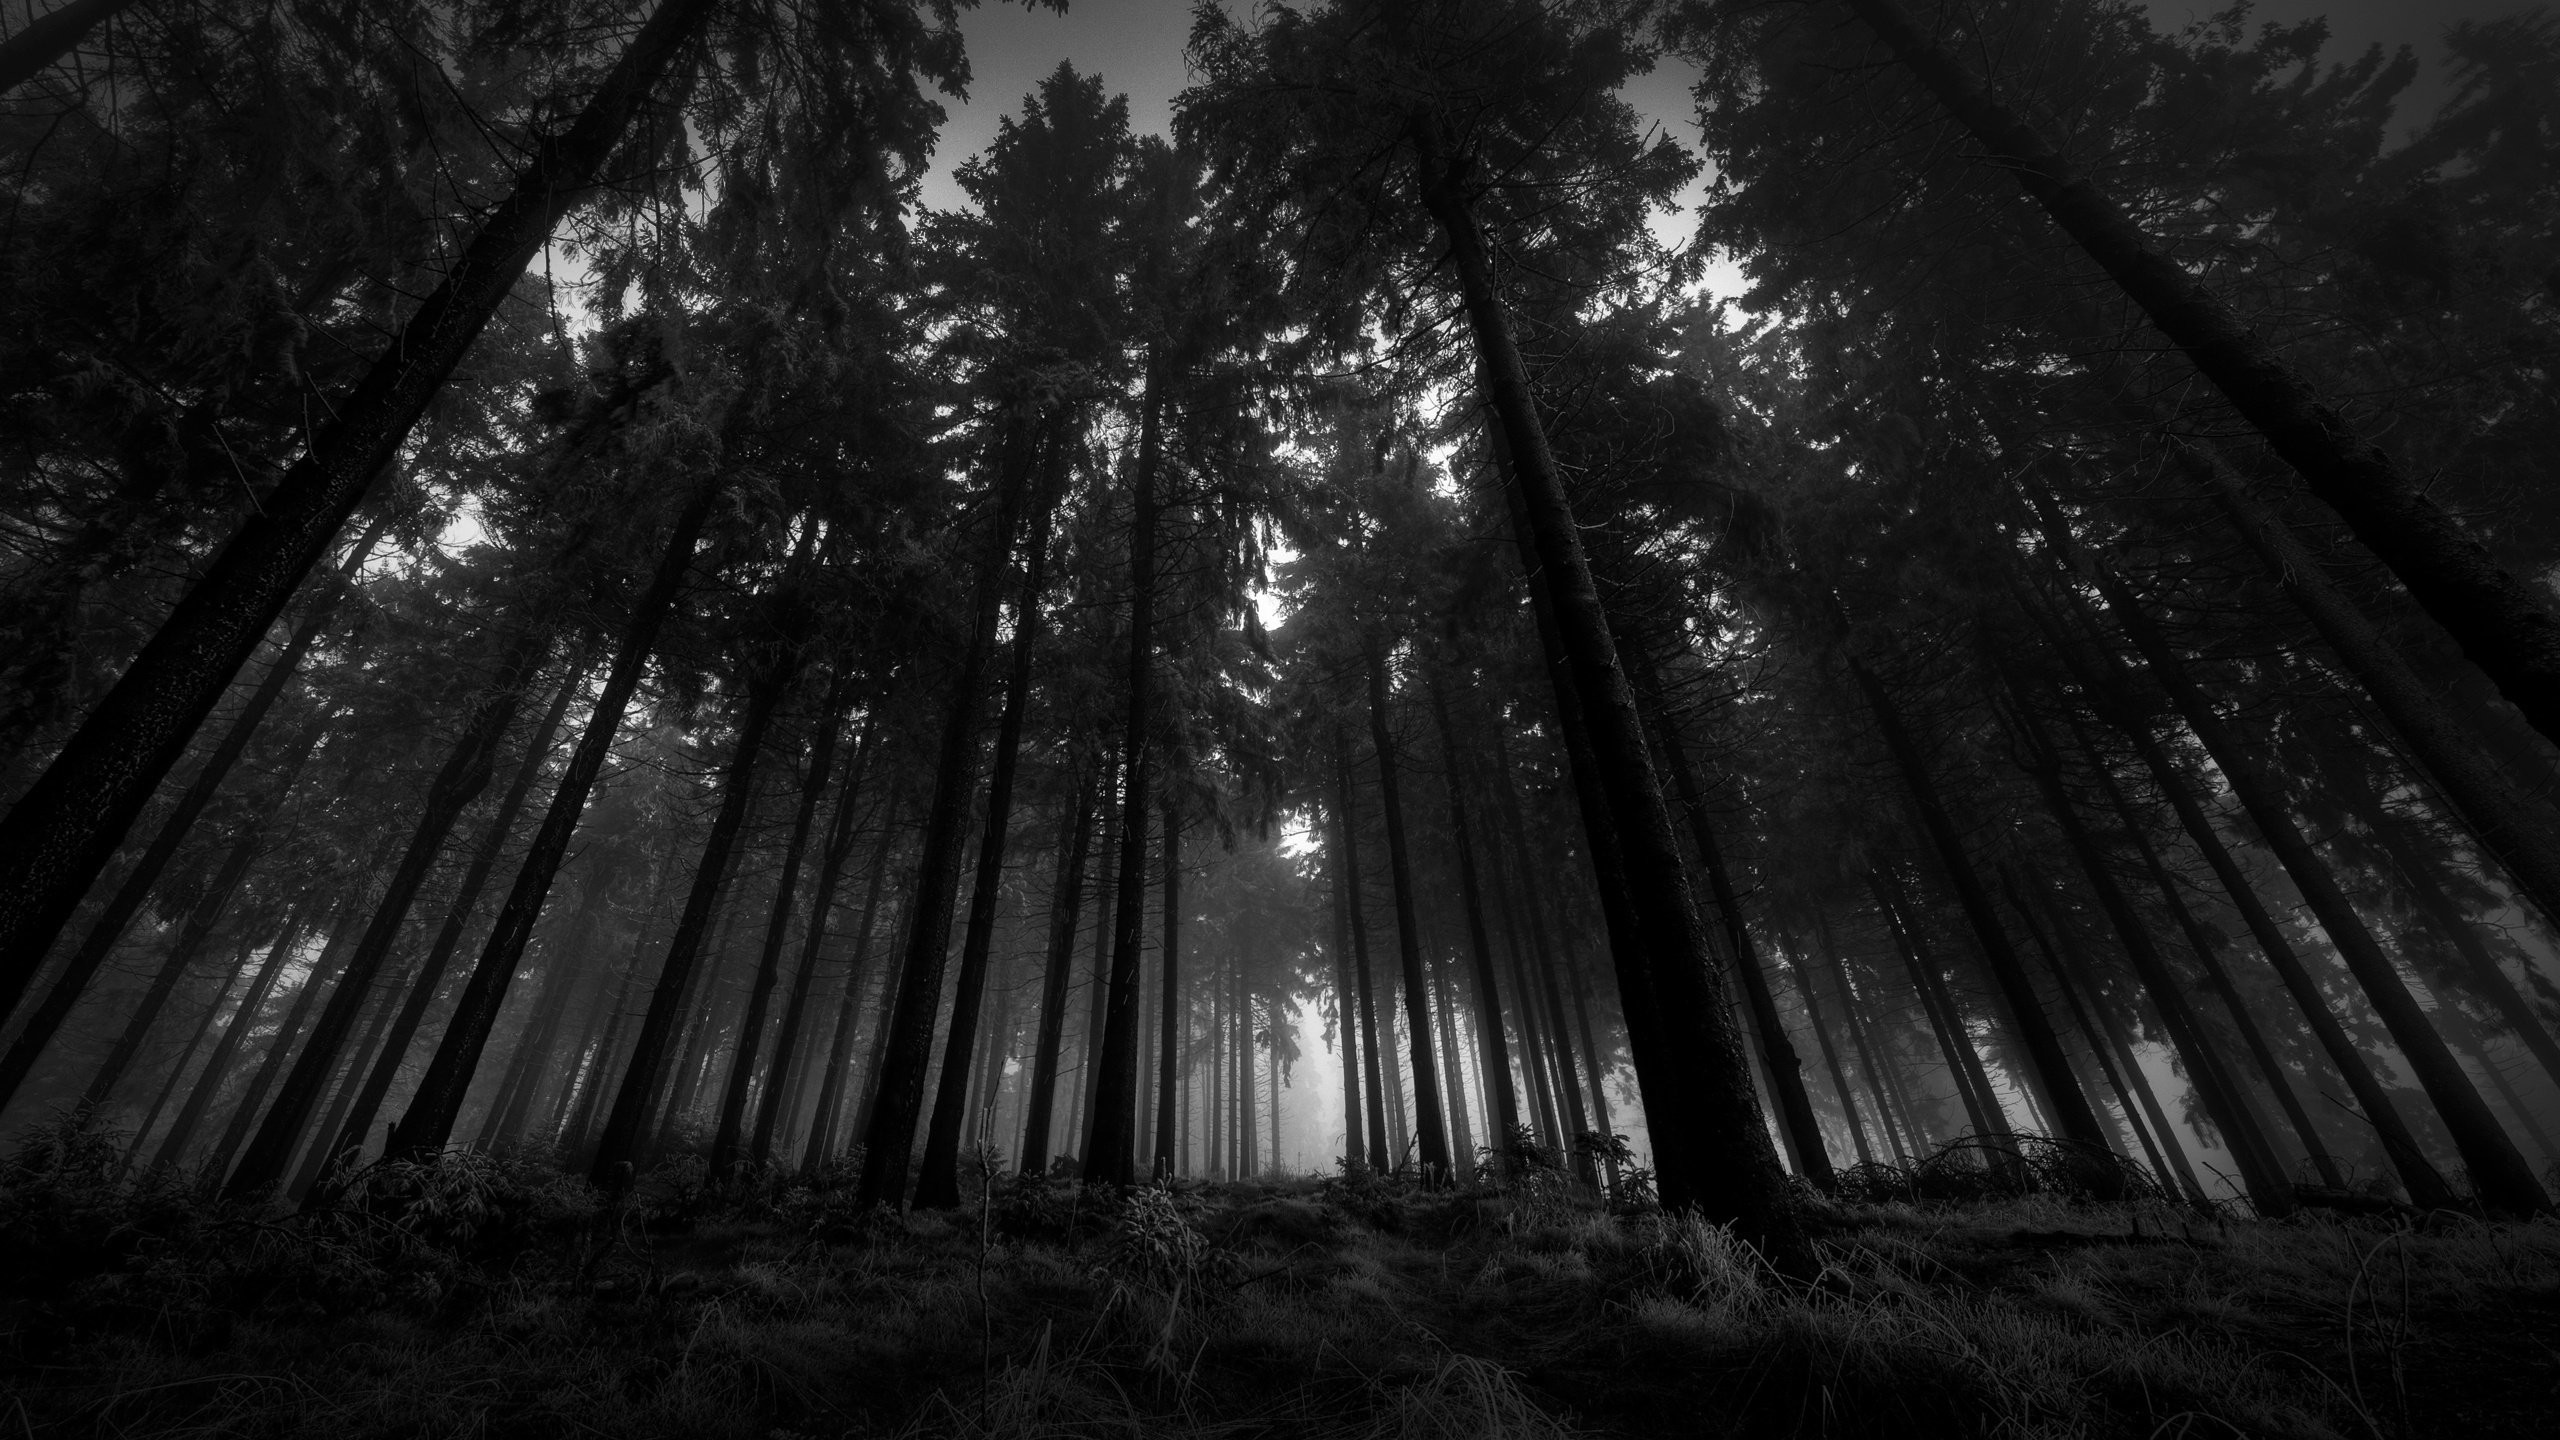 Wallpaper.wiki Download Free Black and White Forest Wallpaper PIC WPB008675